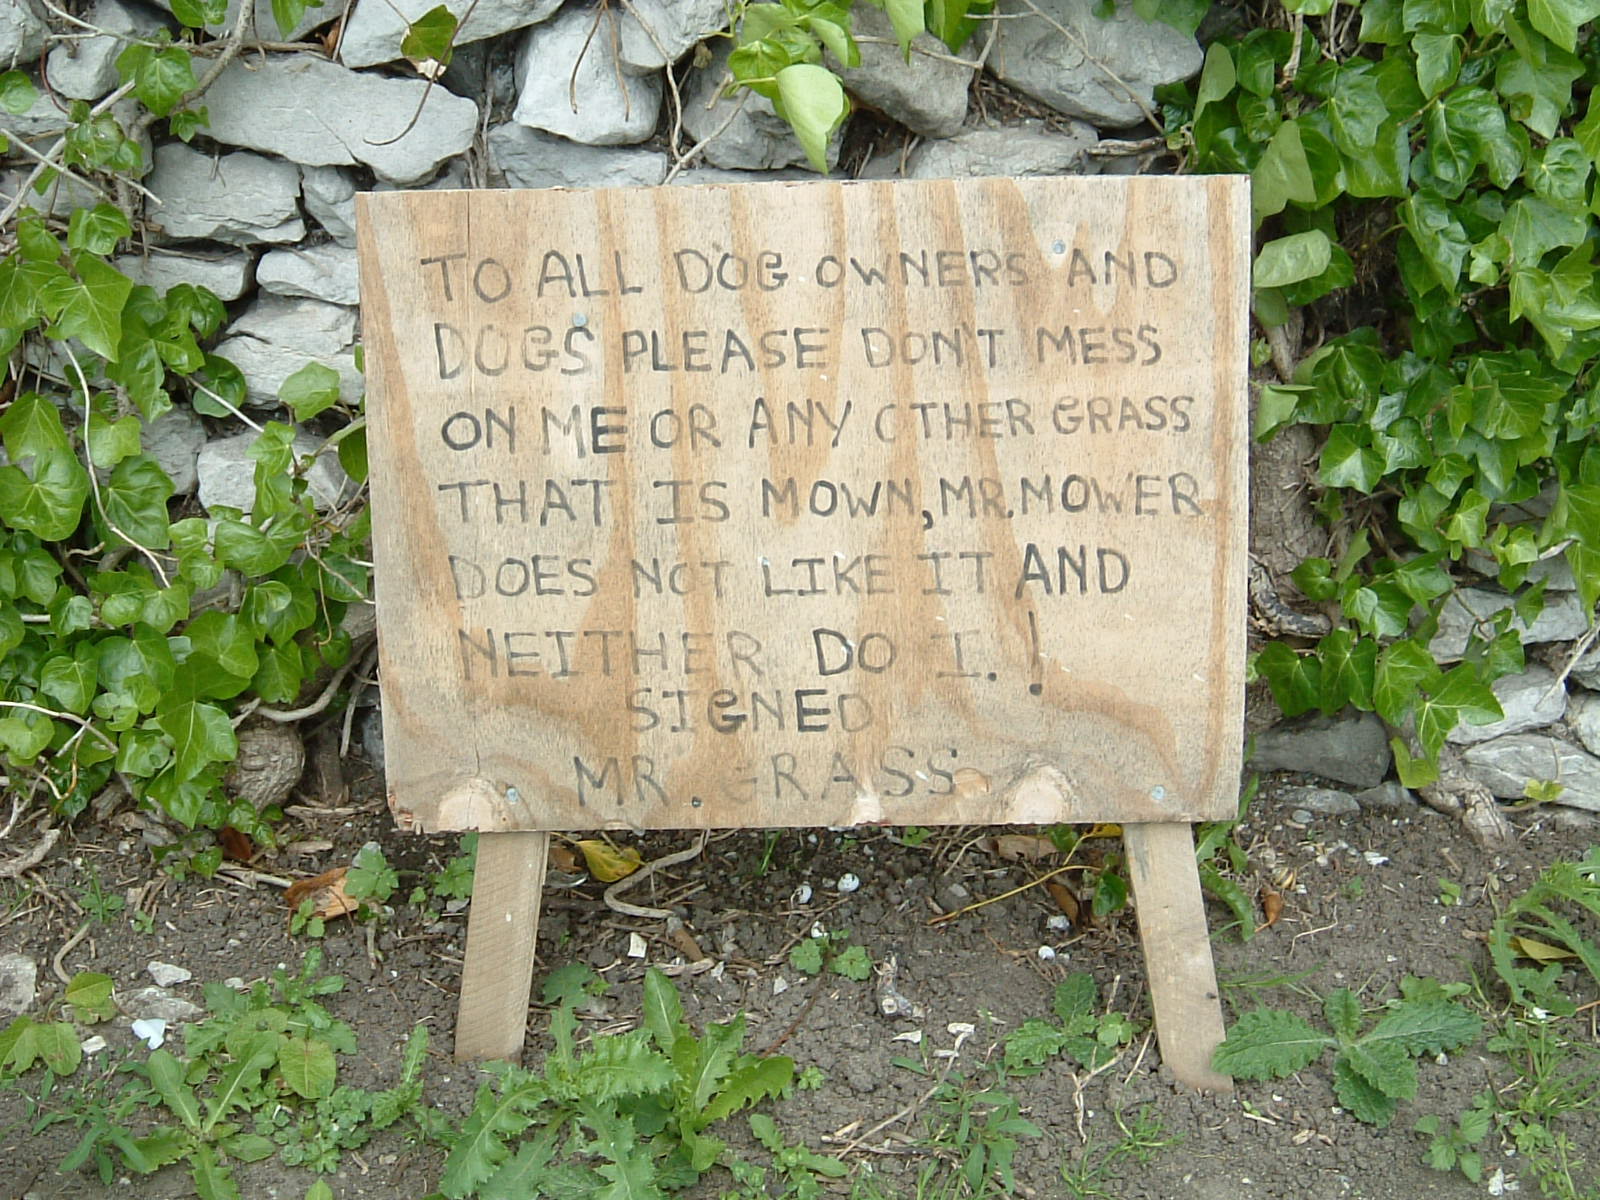 A sign asking people not to let their dogs foul the grass